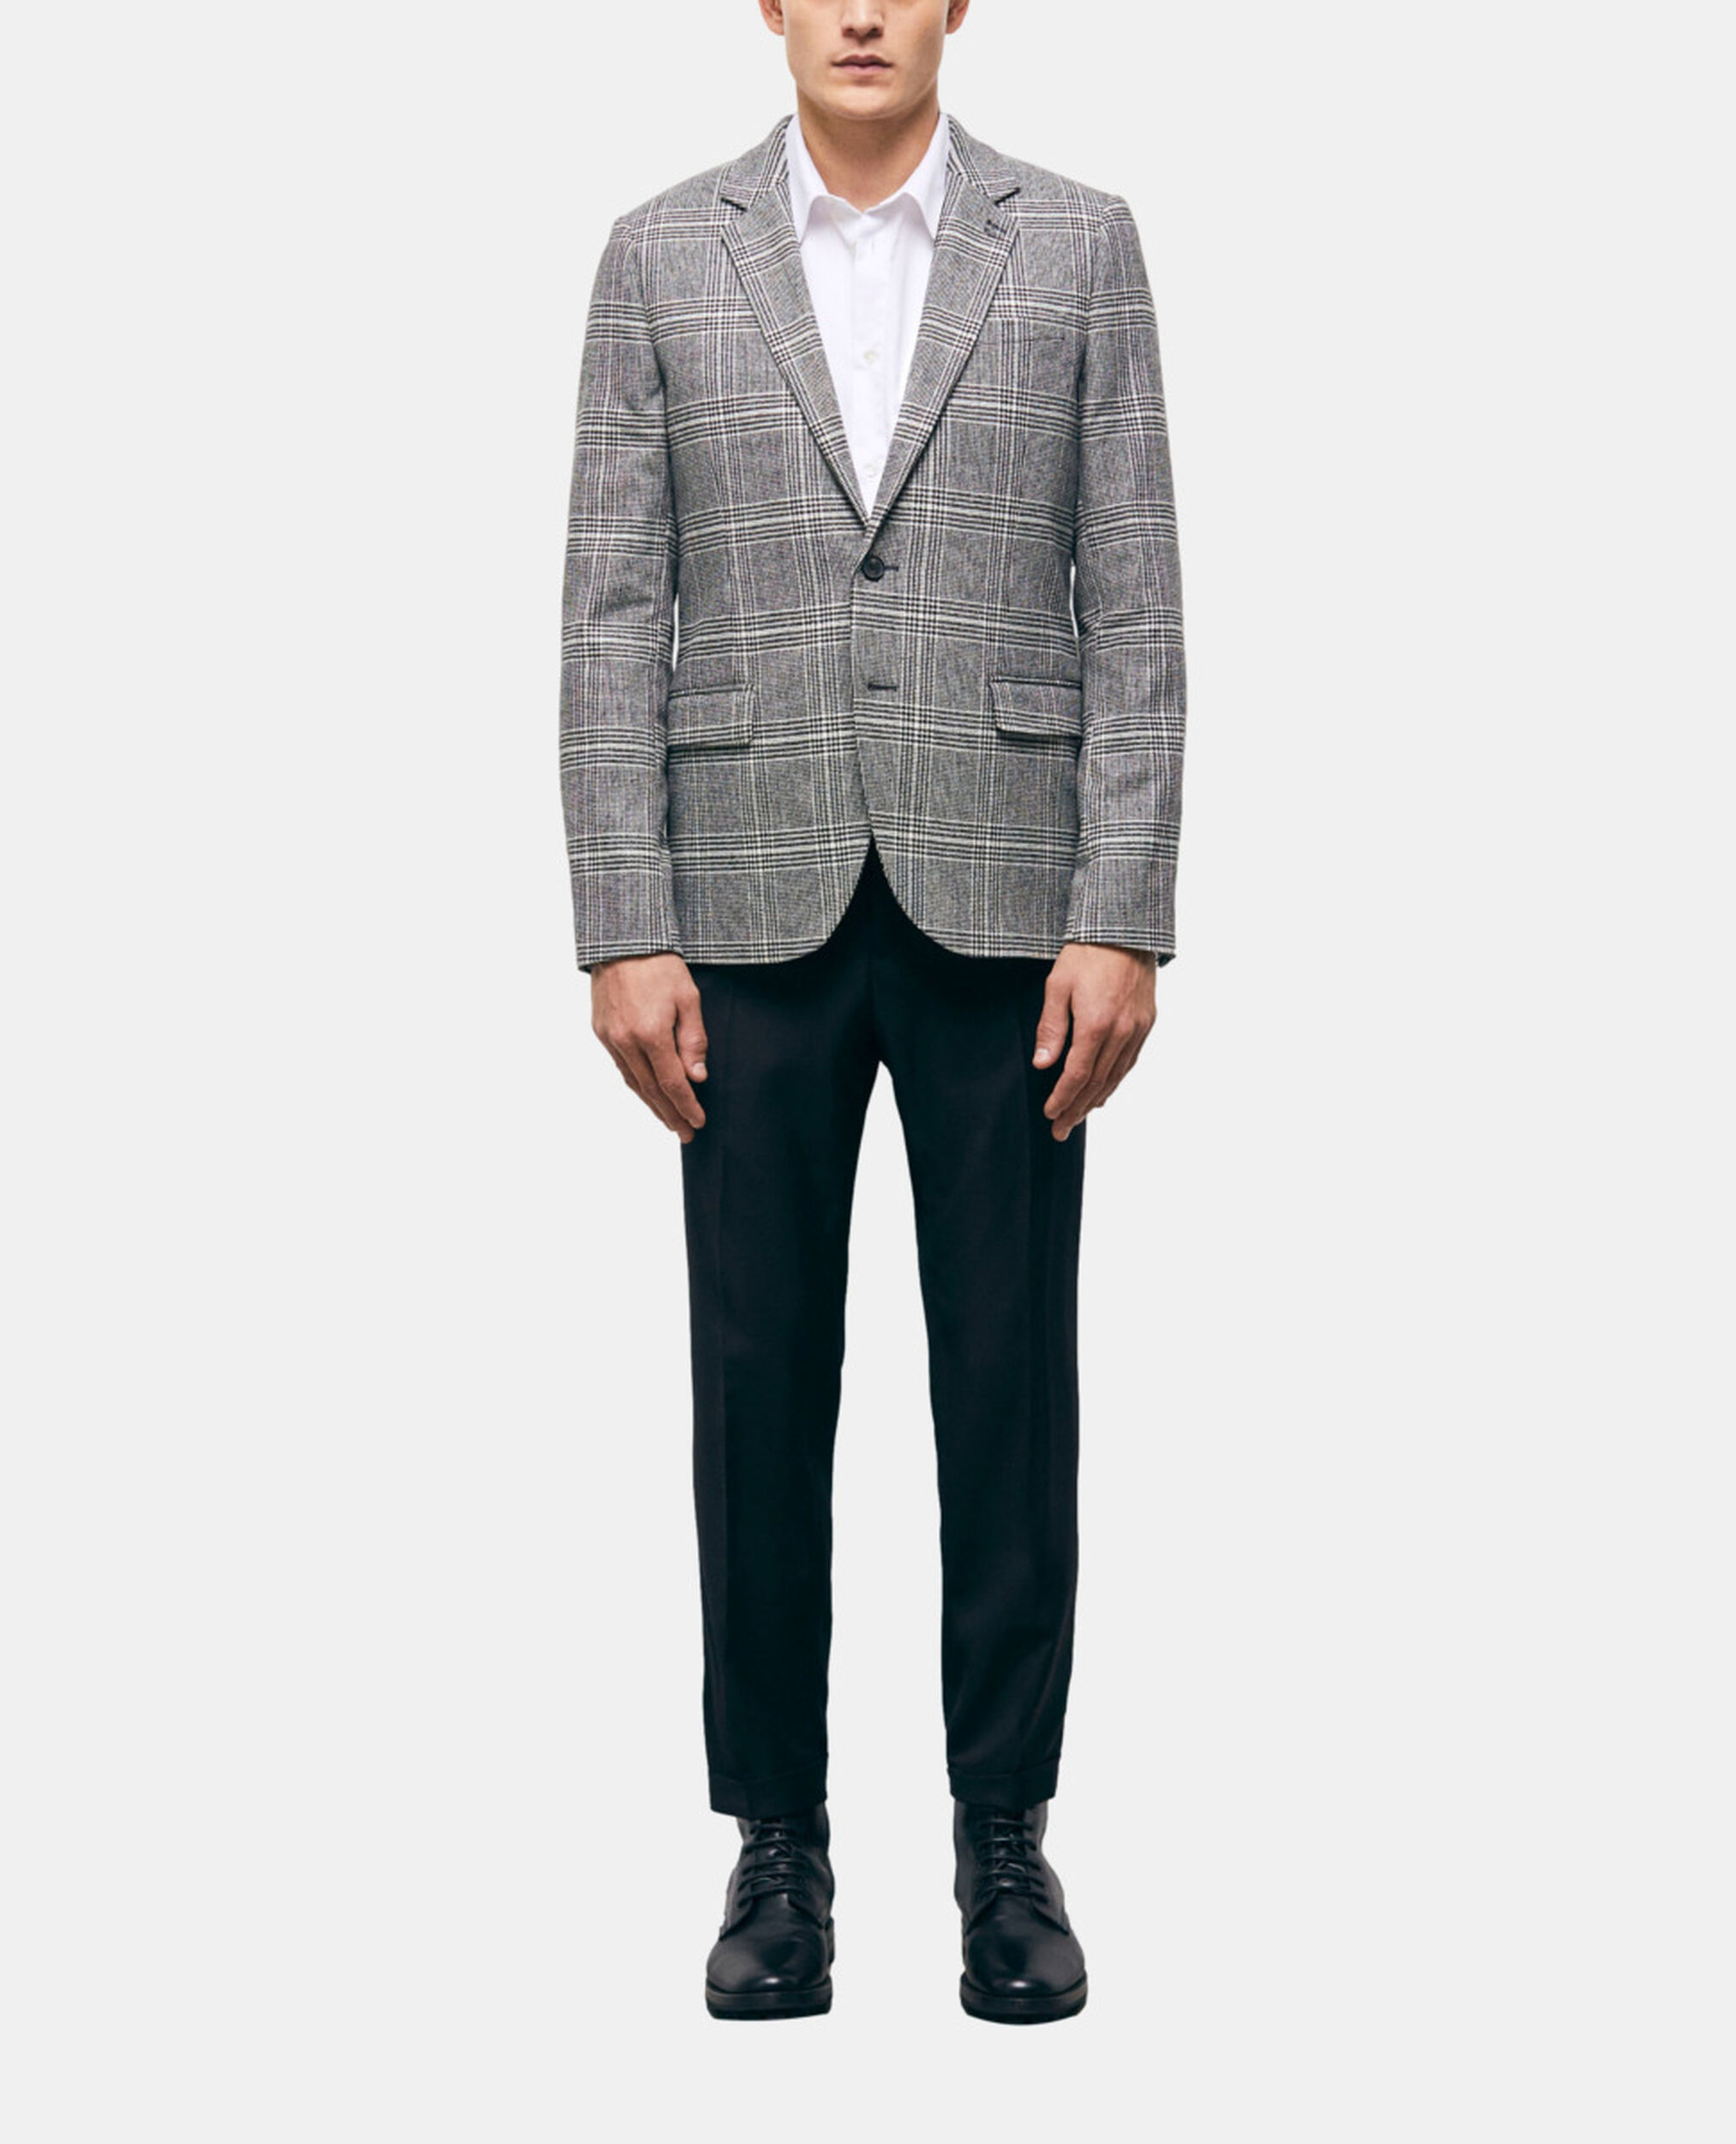 Wool suit jacket with check motif, BLACK WHITE, hi-res image number null